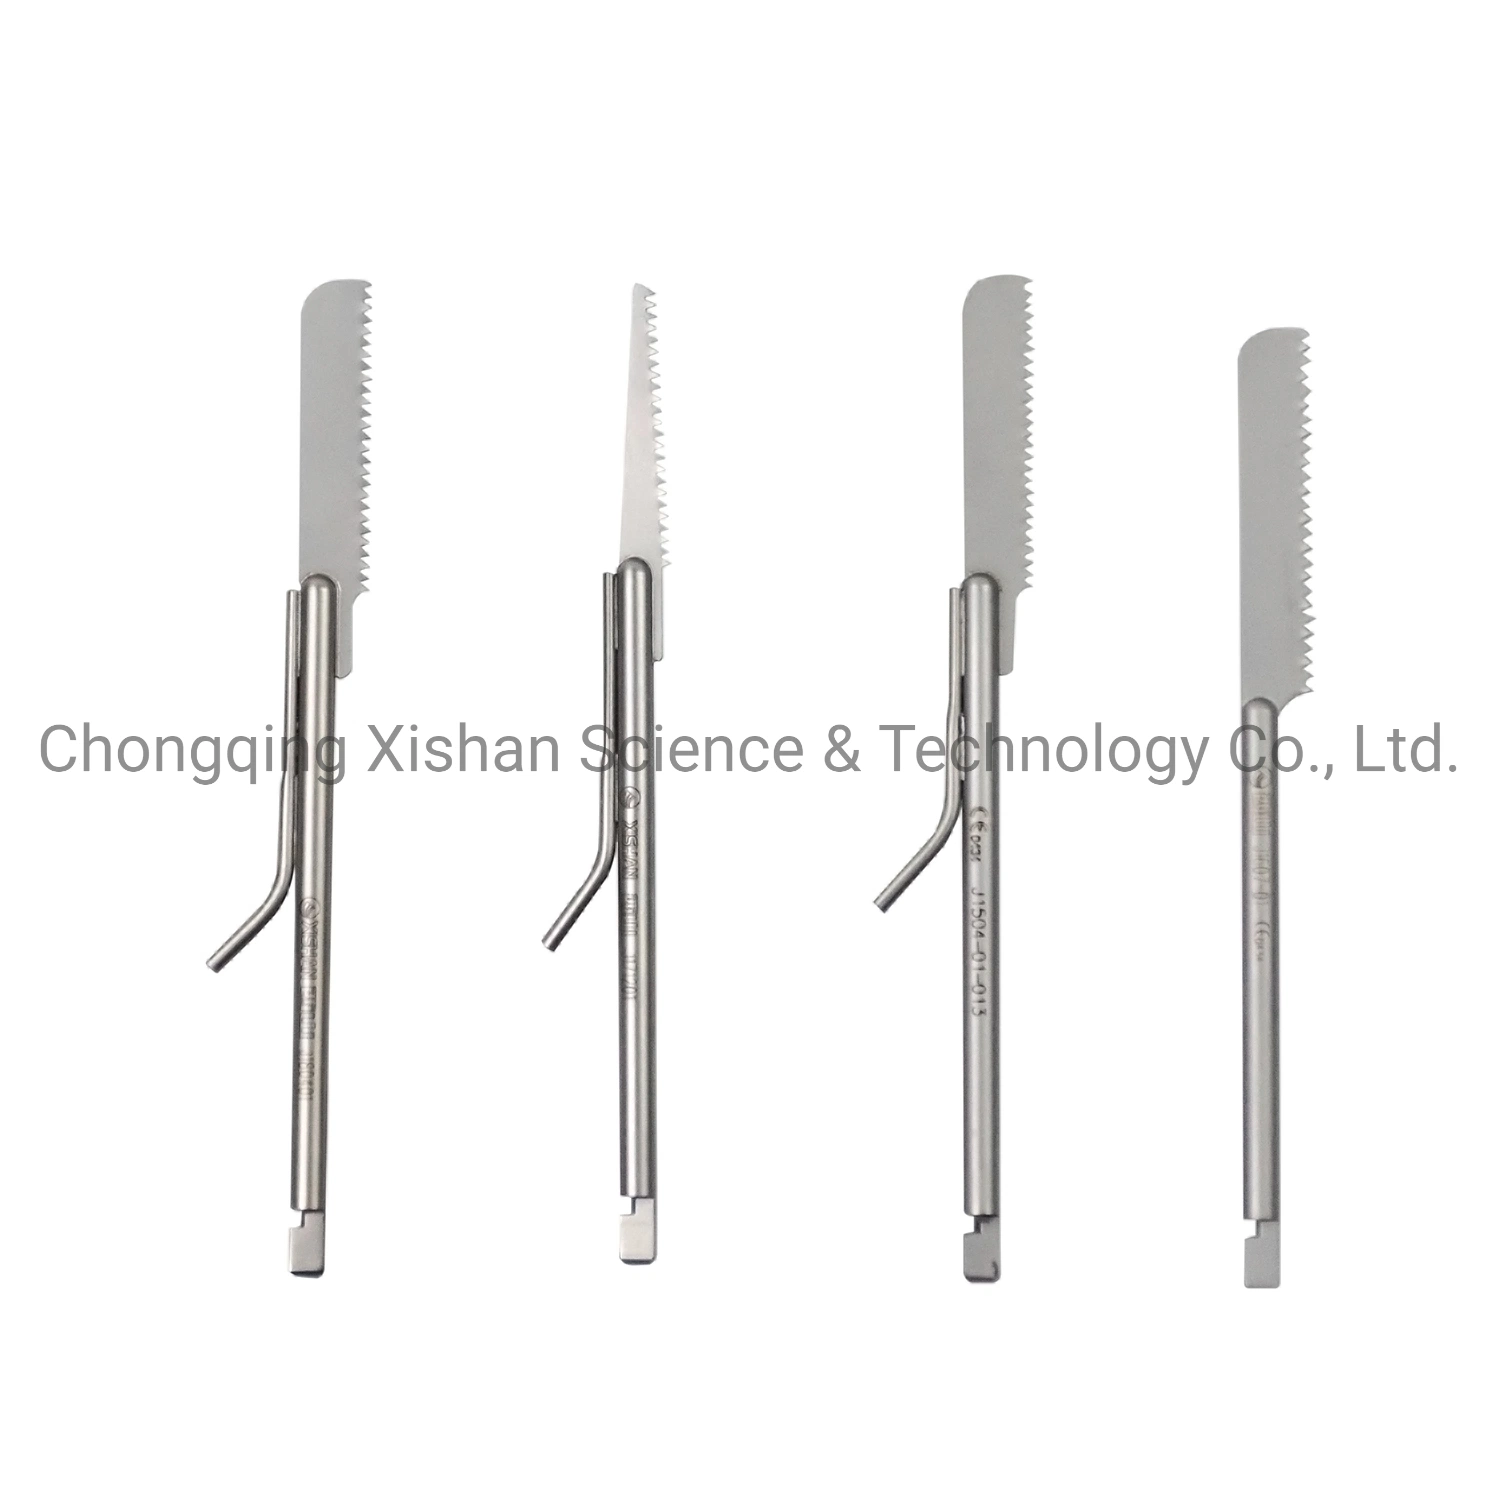 Medical Product Bone Saw/Surgical Power Instrument for Bone Shaver Drill Bur for Hand Foot Finger Cutter Single-Use Consumable Disposable Medical Tool